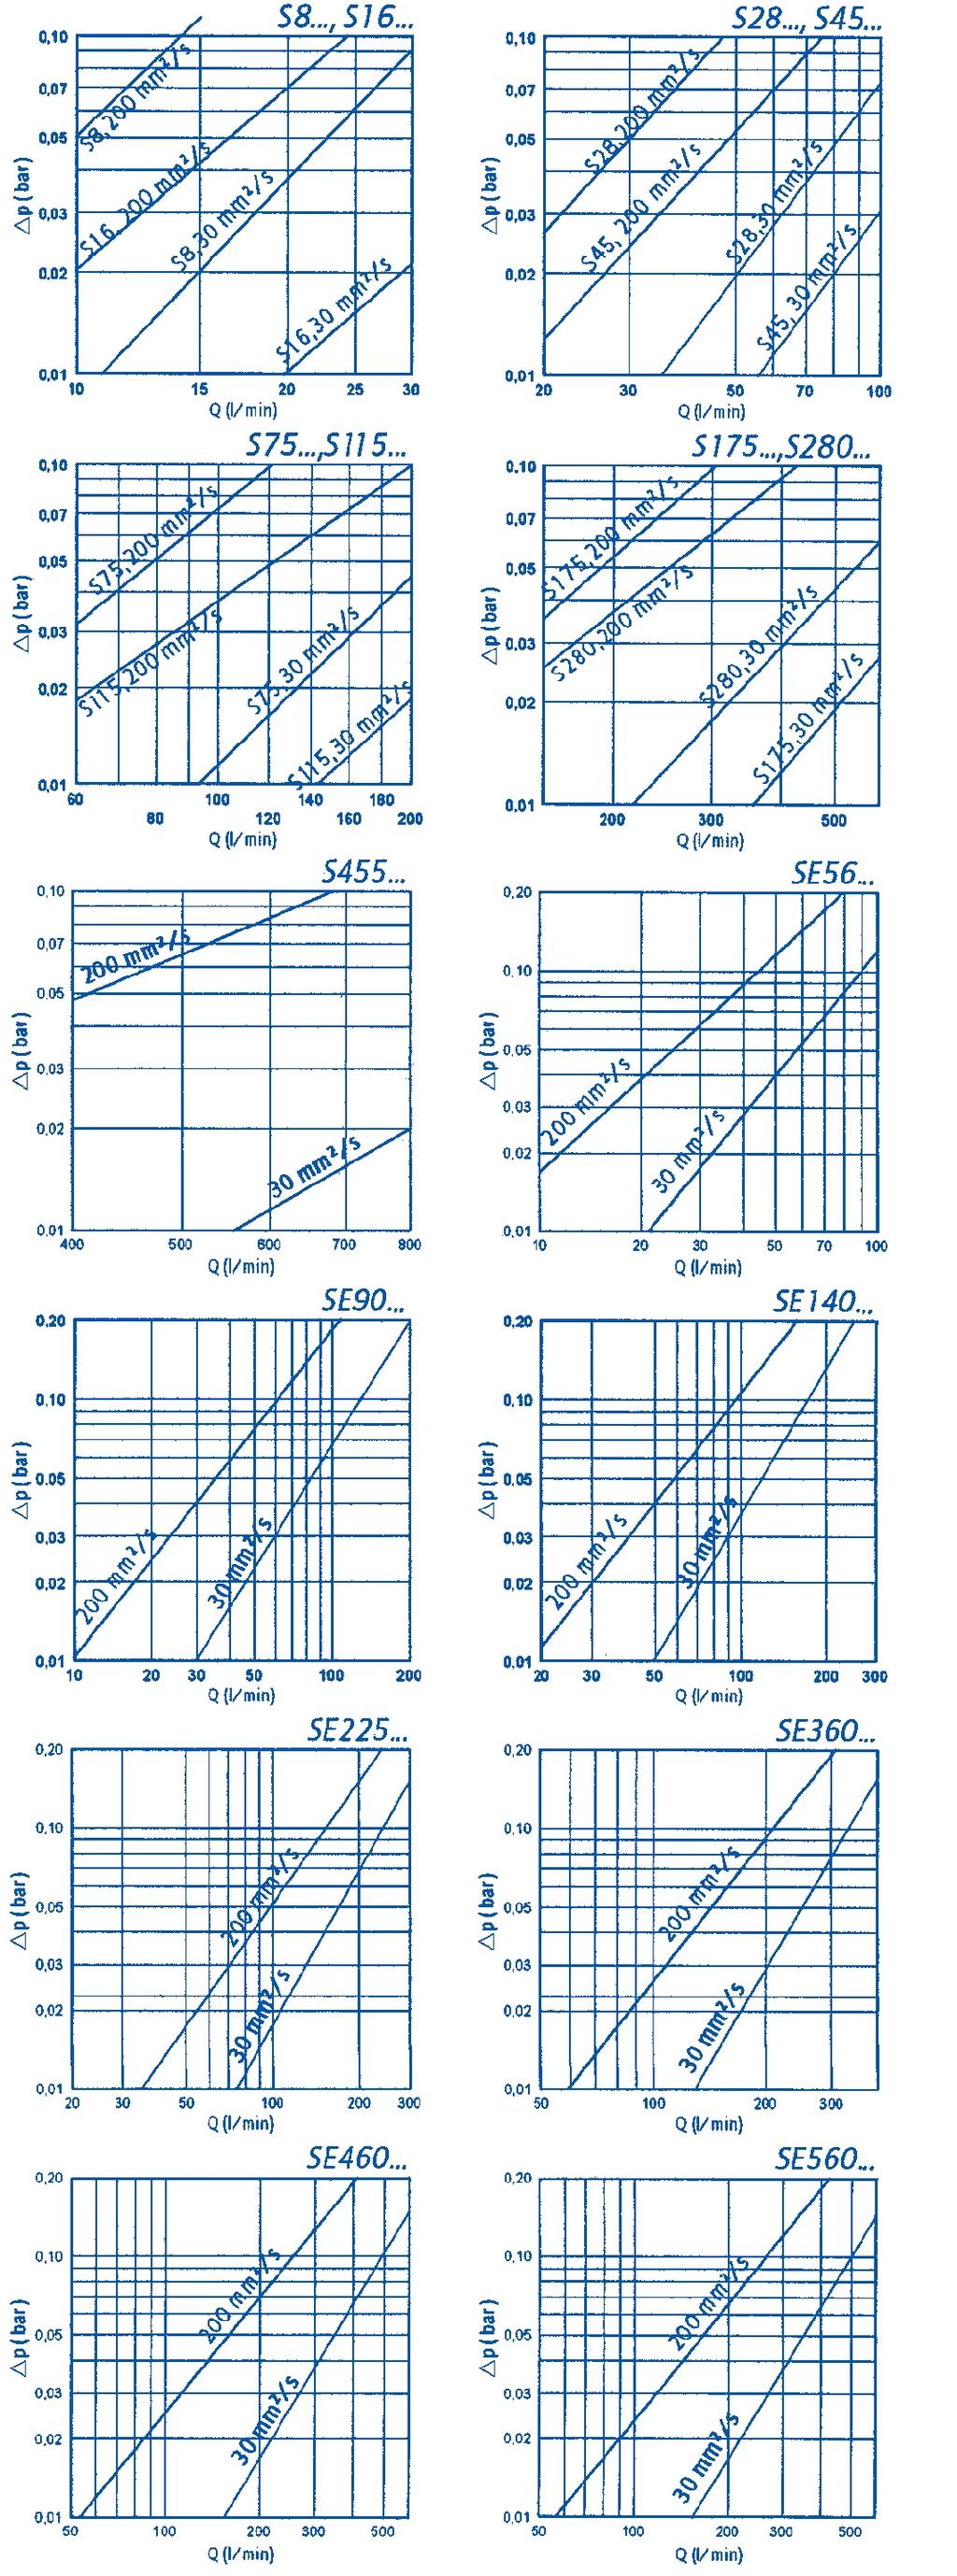 uction Filters Performance Characteristics Oil viscosity 3,2 mm /sec 2 drop curves for wire mesh G 1 8-5 E56-56 Nominal flow rate: 15-1 l/min Operating temperature: -1 C up to +1 C up to E 4